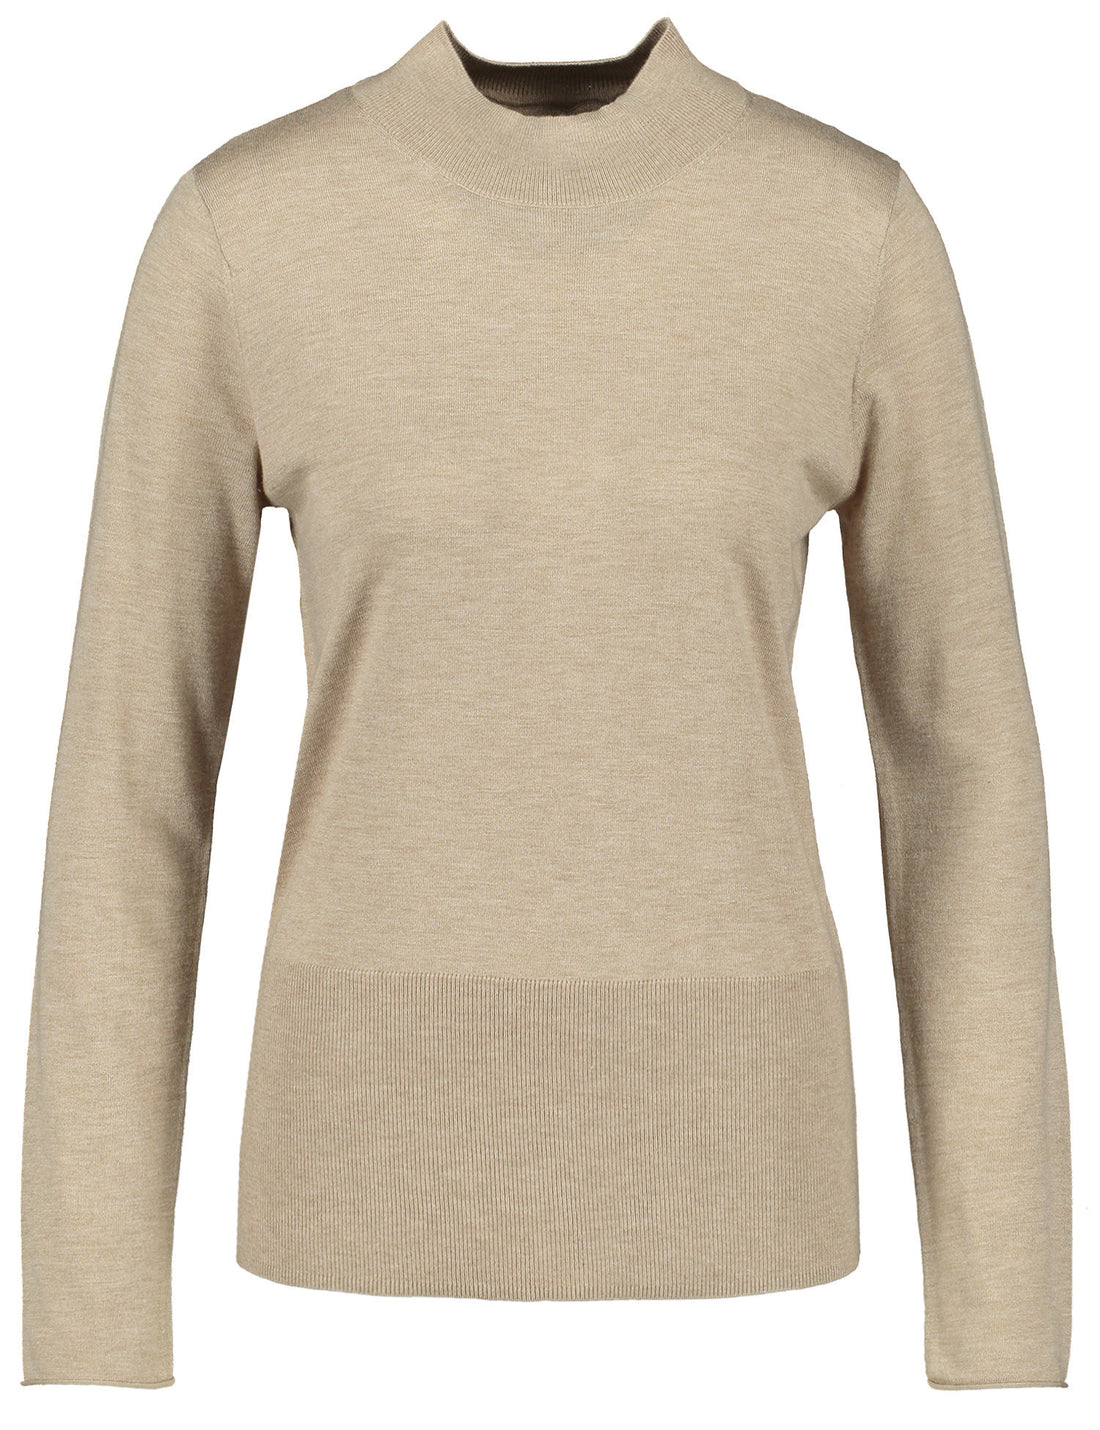 Beige Knitted Pullover With Mock Neck_170530-44705_904980_01